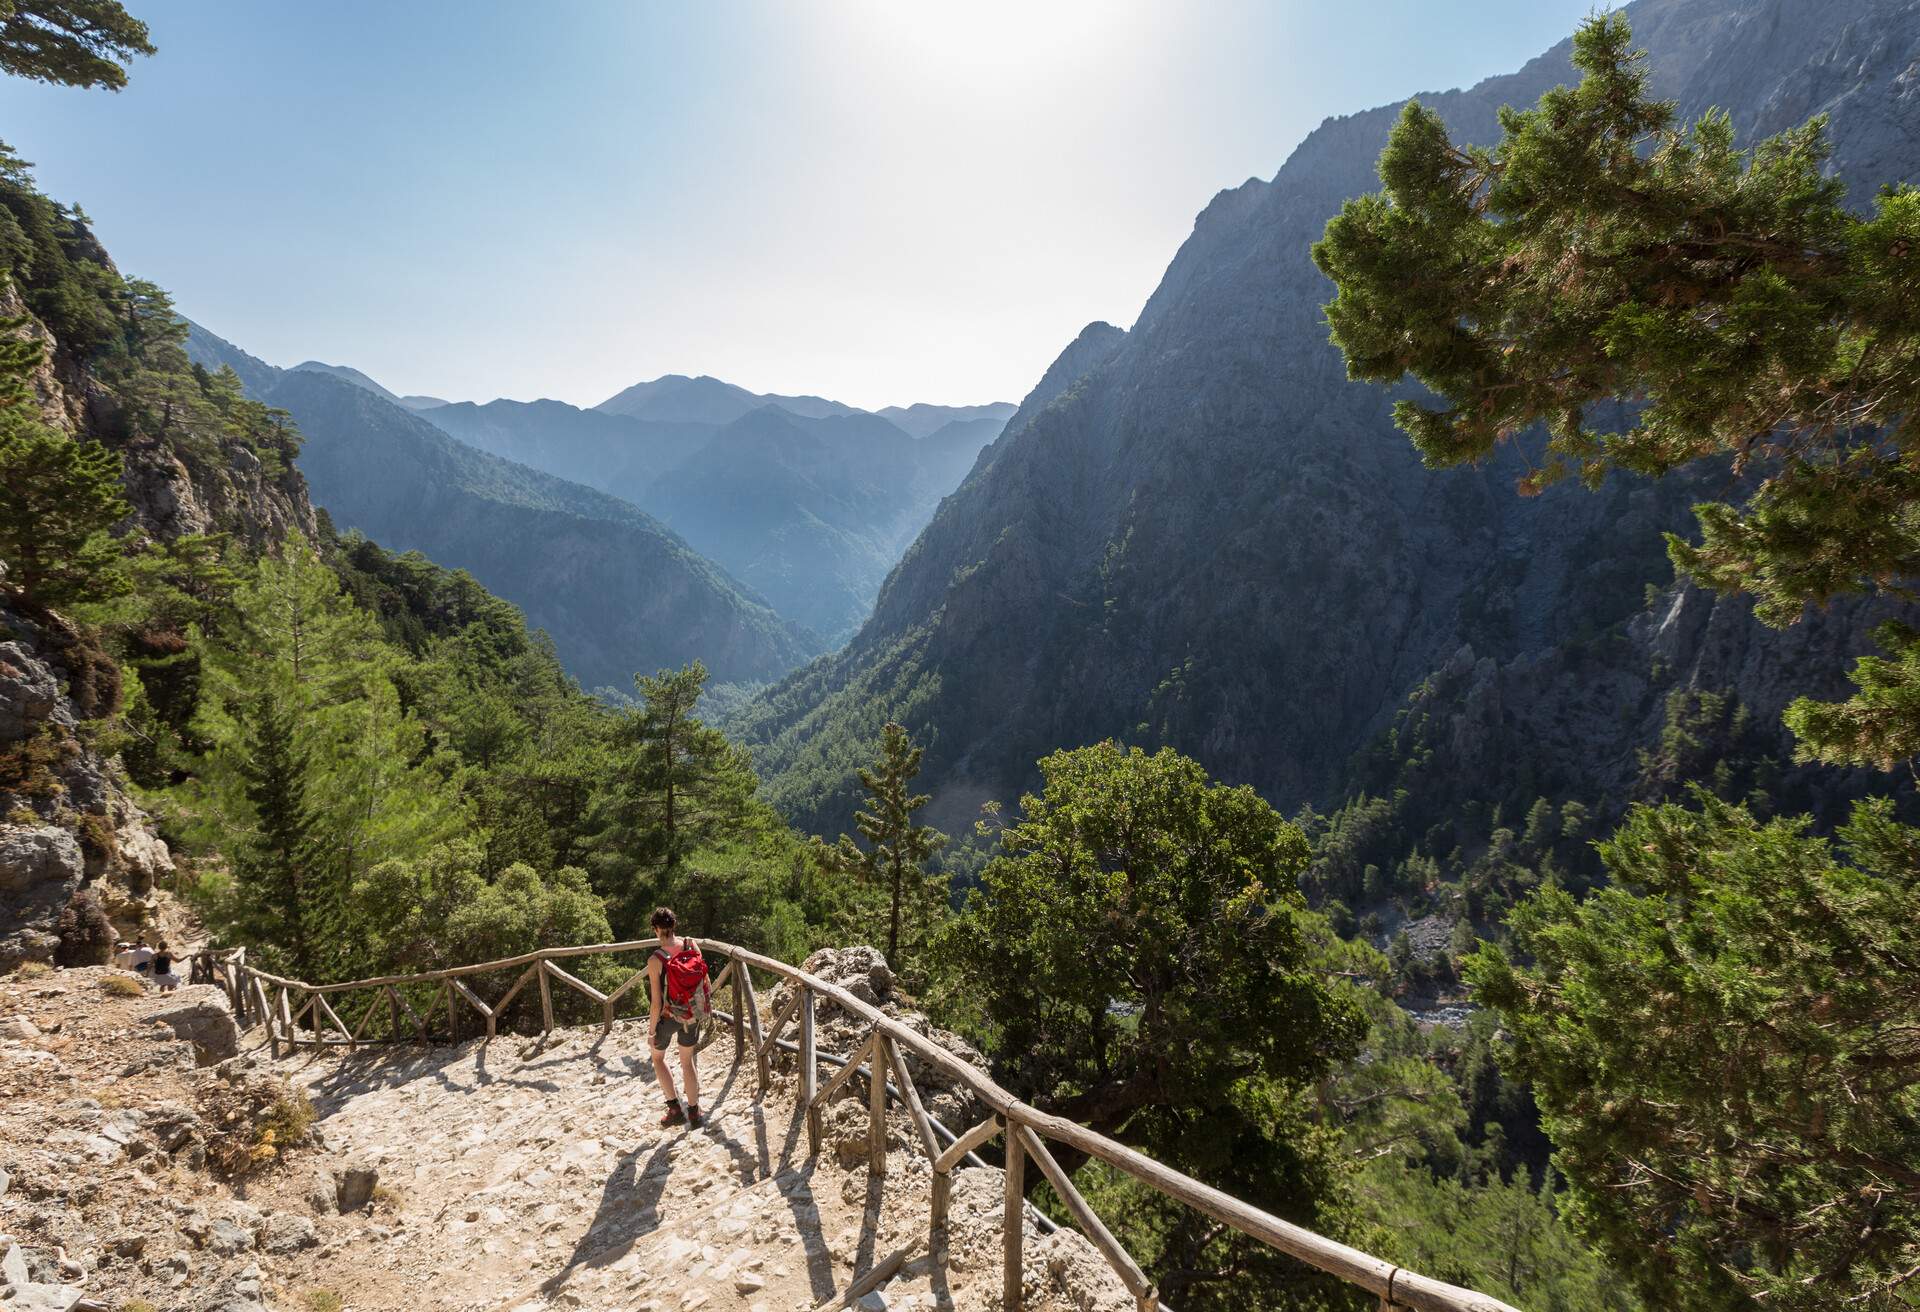 A woman on her way down to the entrance of Samaria Gorge, Crete. The gorge is in southwest Crete in the regional unit of Chania and a major tourist attraction of the island. It was created by a small river running between the White Mountains and Mt. Volakias. The gorge is 16 km long, starting at an altitude of 1,250 m (4100 ft.)at the northern entrance, and ending at the shores of the Libyan Sea in Agia Roumeli.